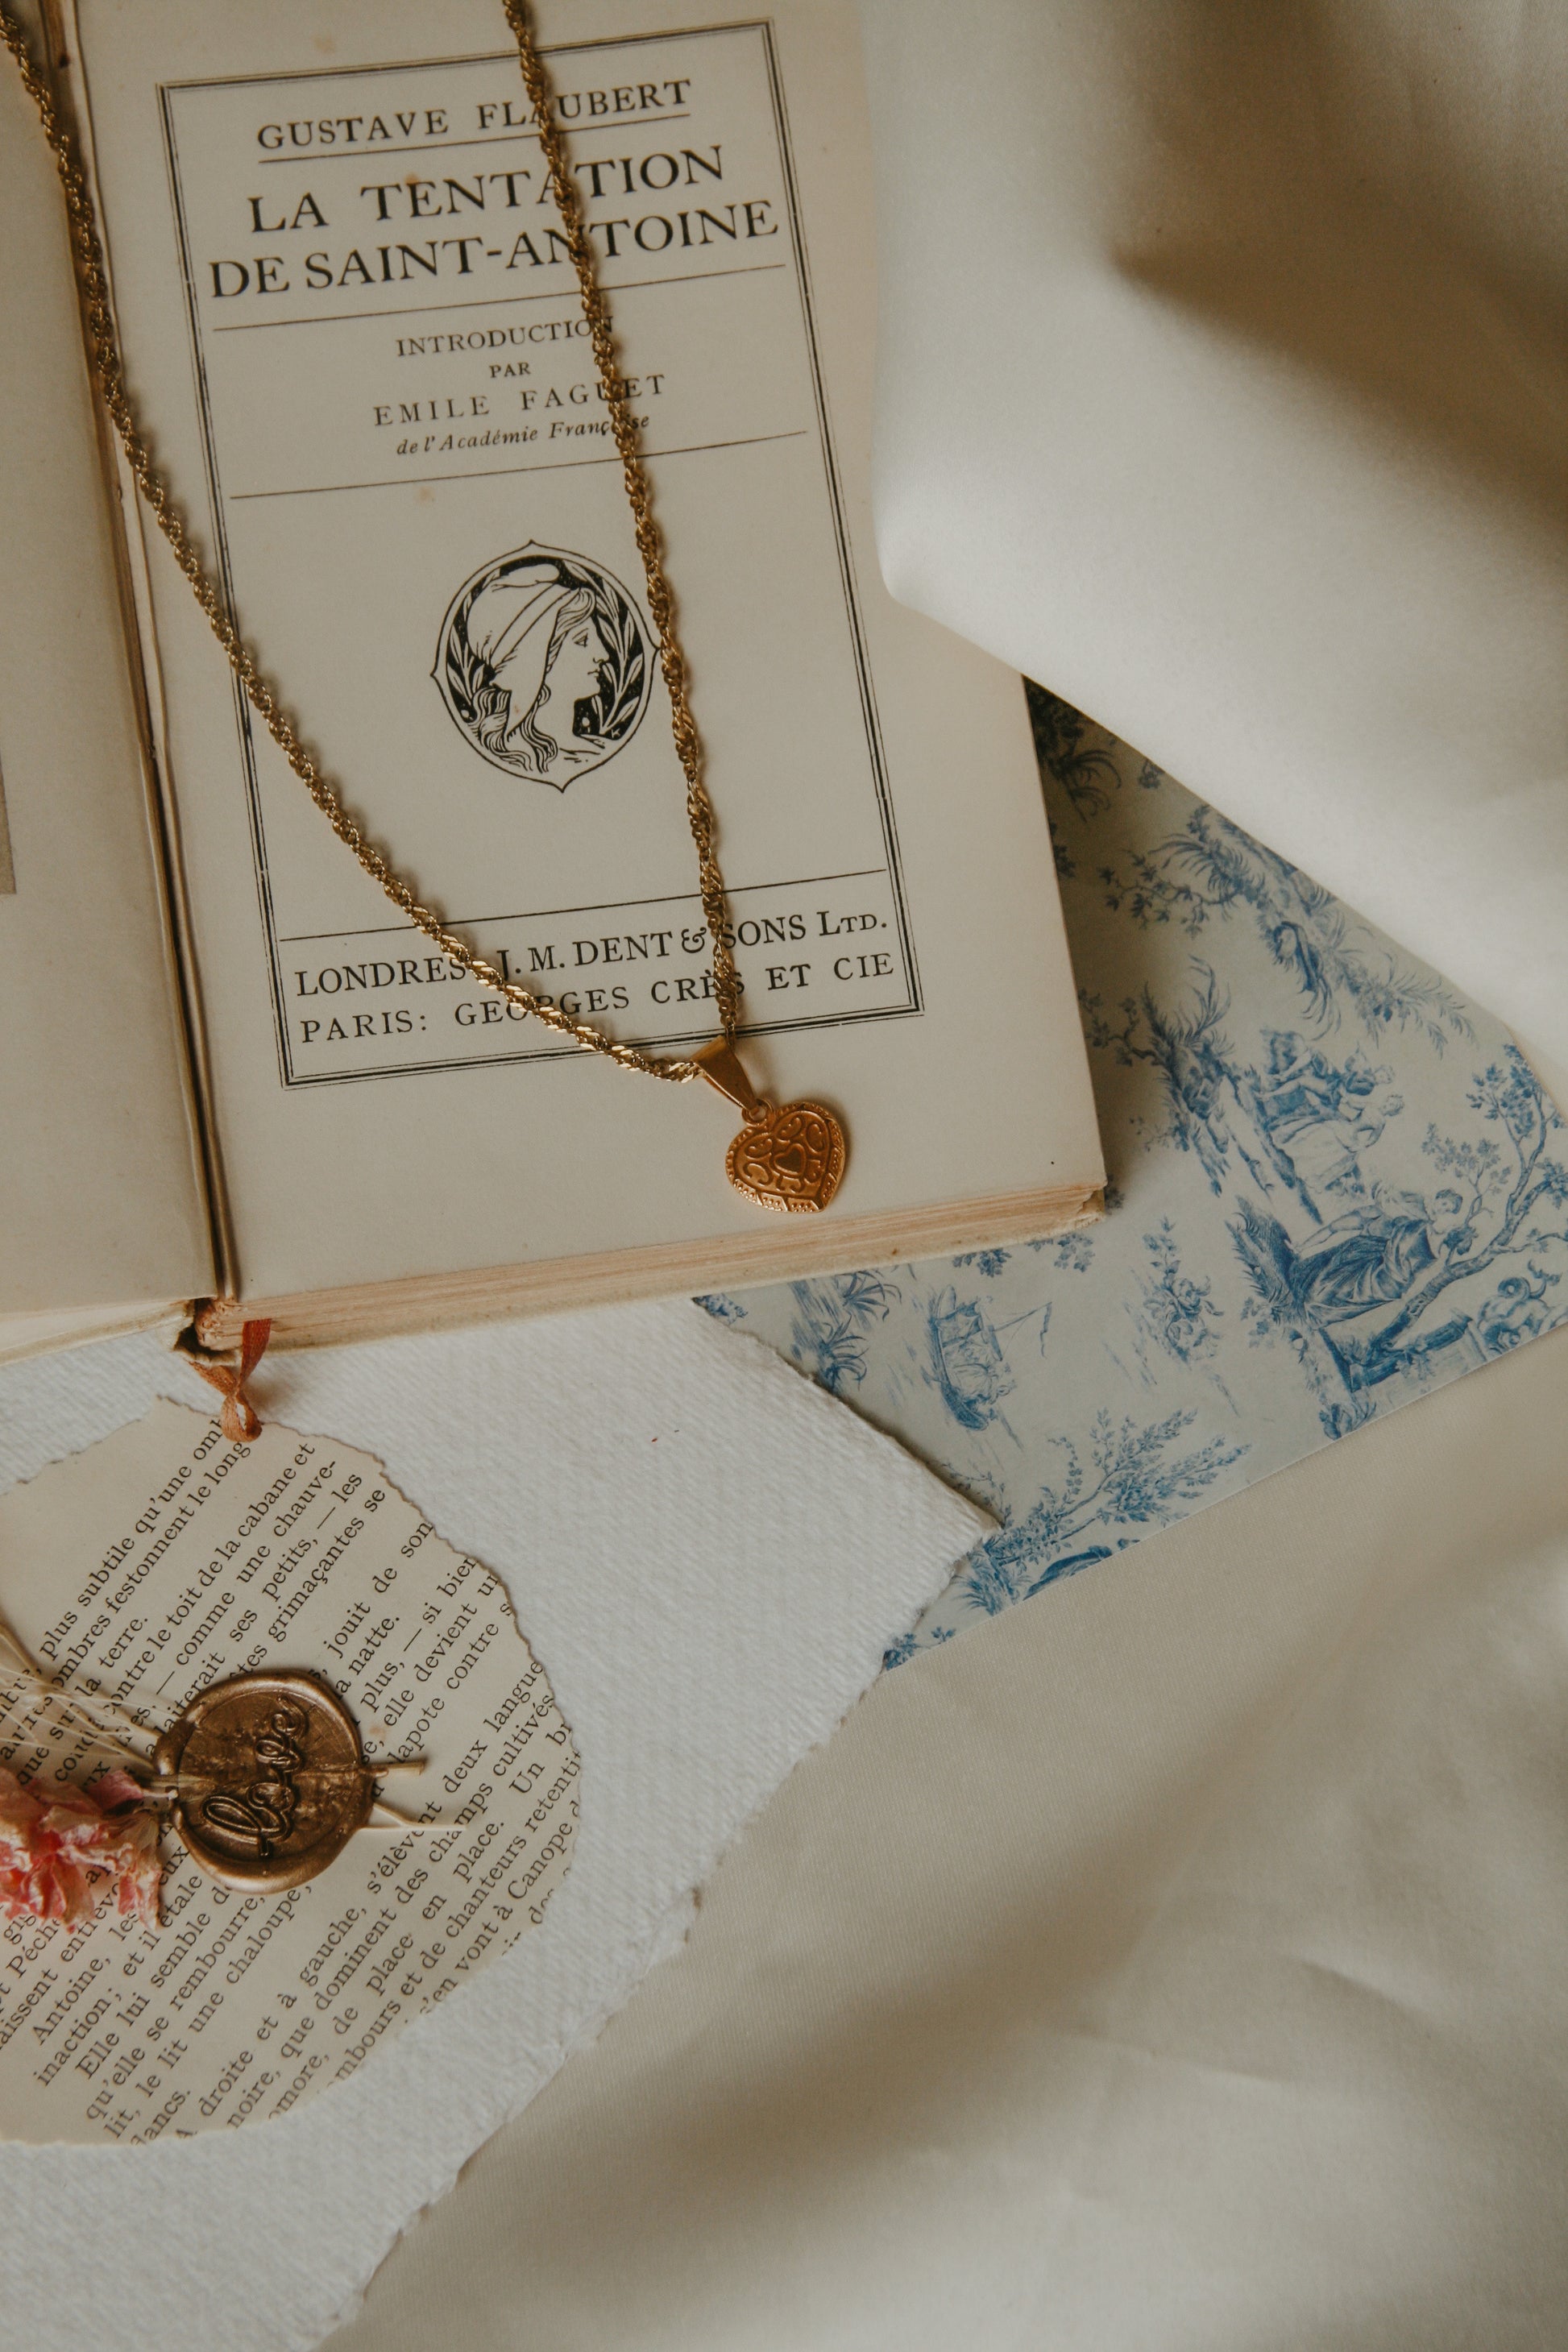 Juliet Capulet inspired heart necklace by bookish jewellery brand Avery Faye